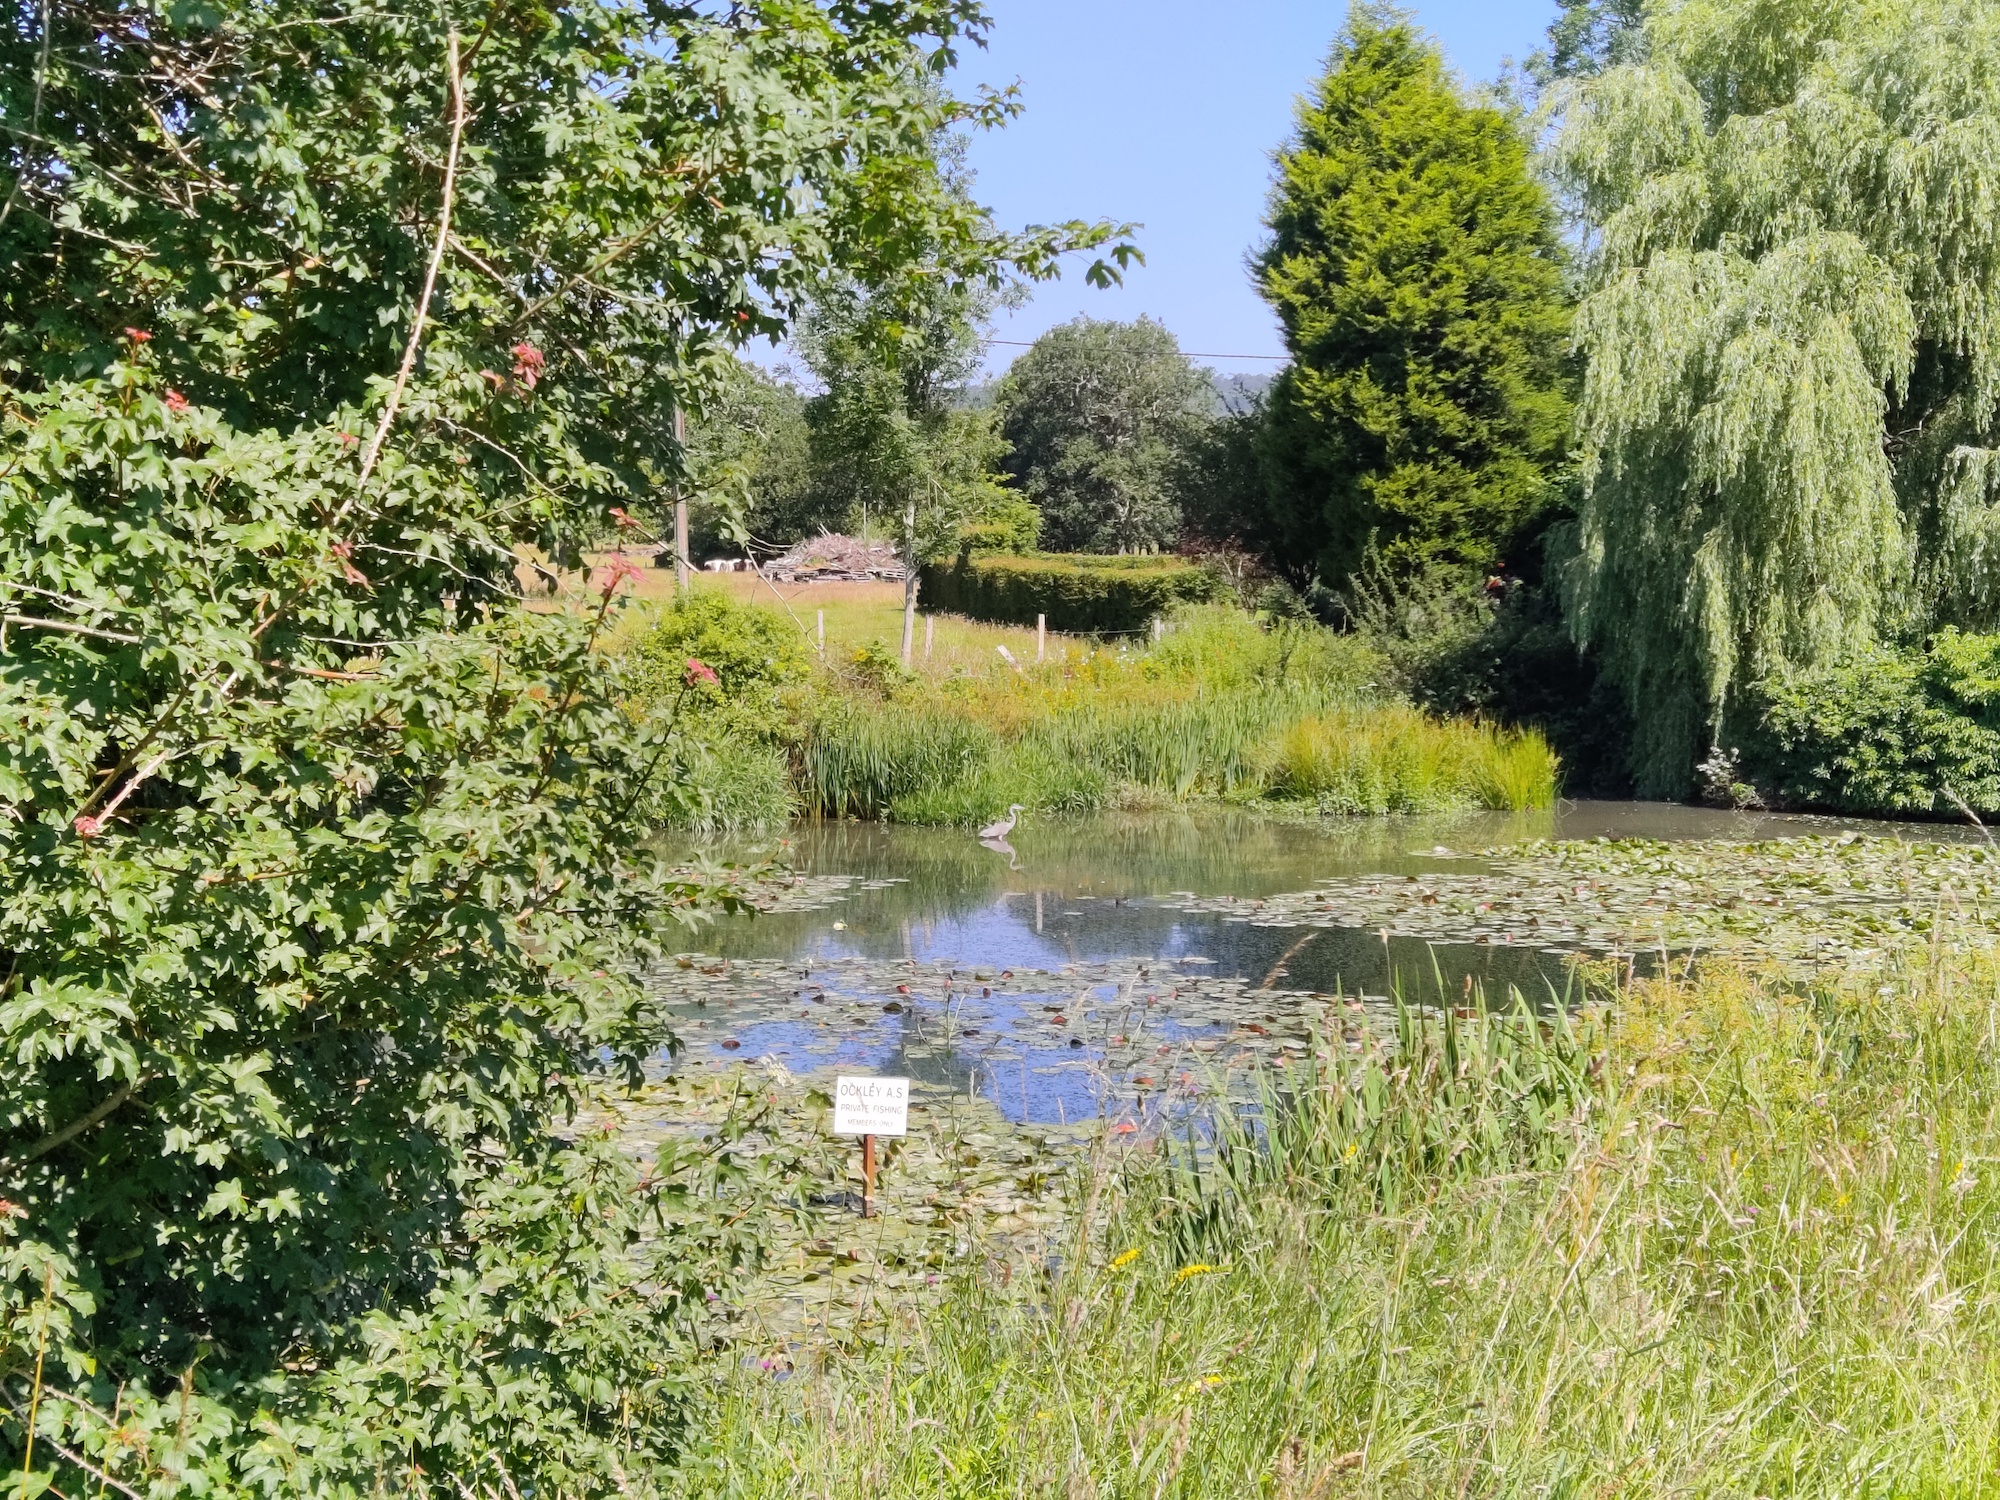 Daytime photo of a pond taken with the TCL 20 Pro 5G